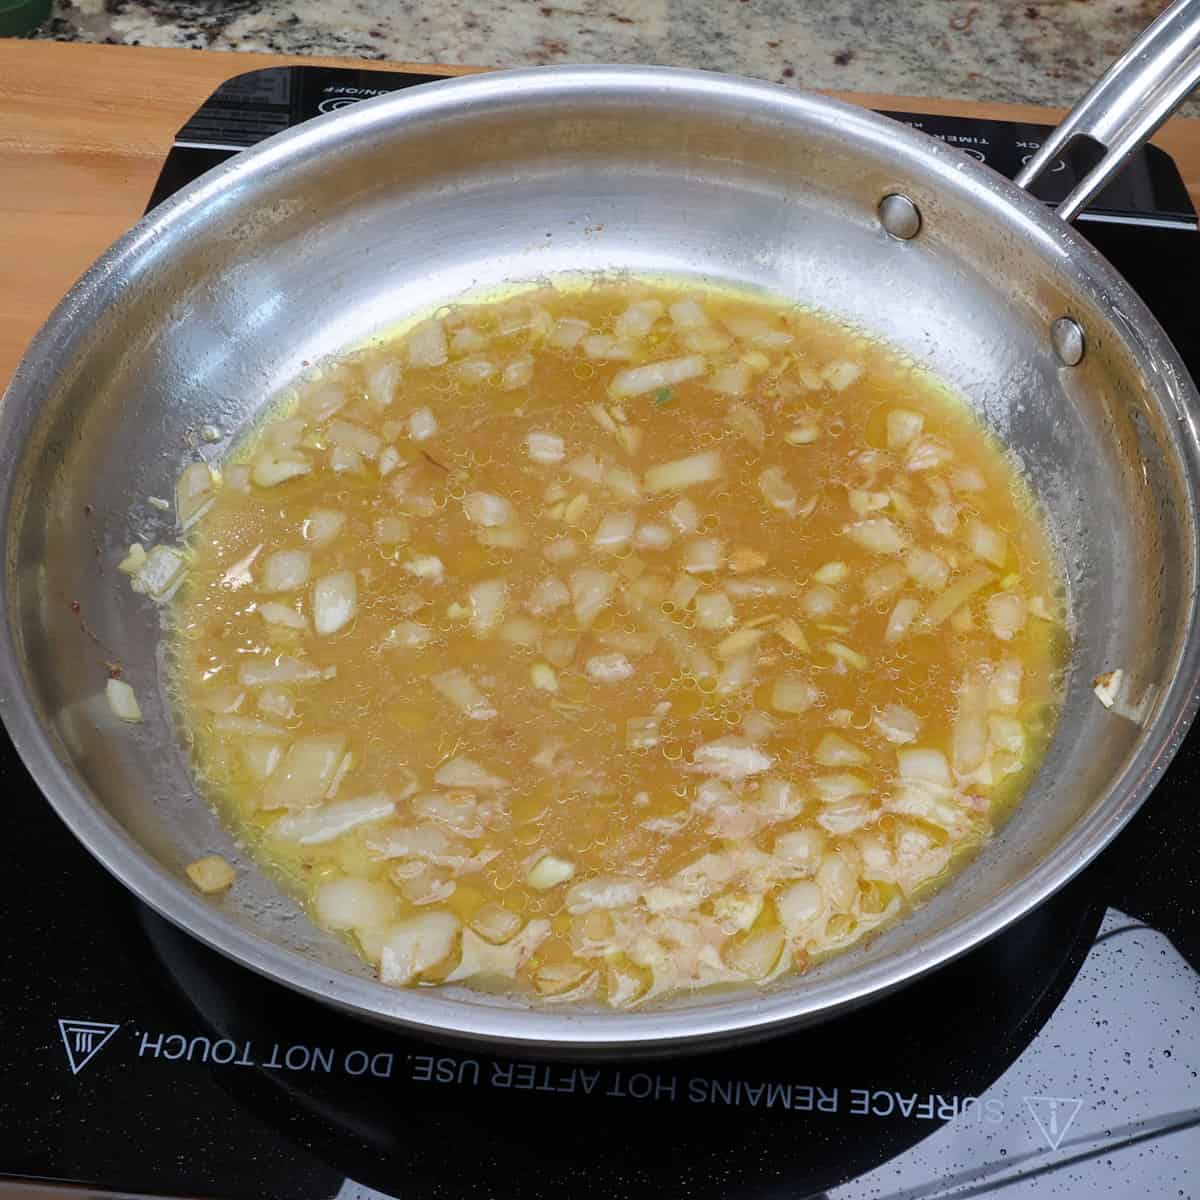 chicken broth, onions, and garlic simmering in a pan on the stove.